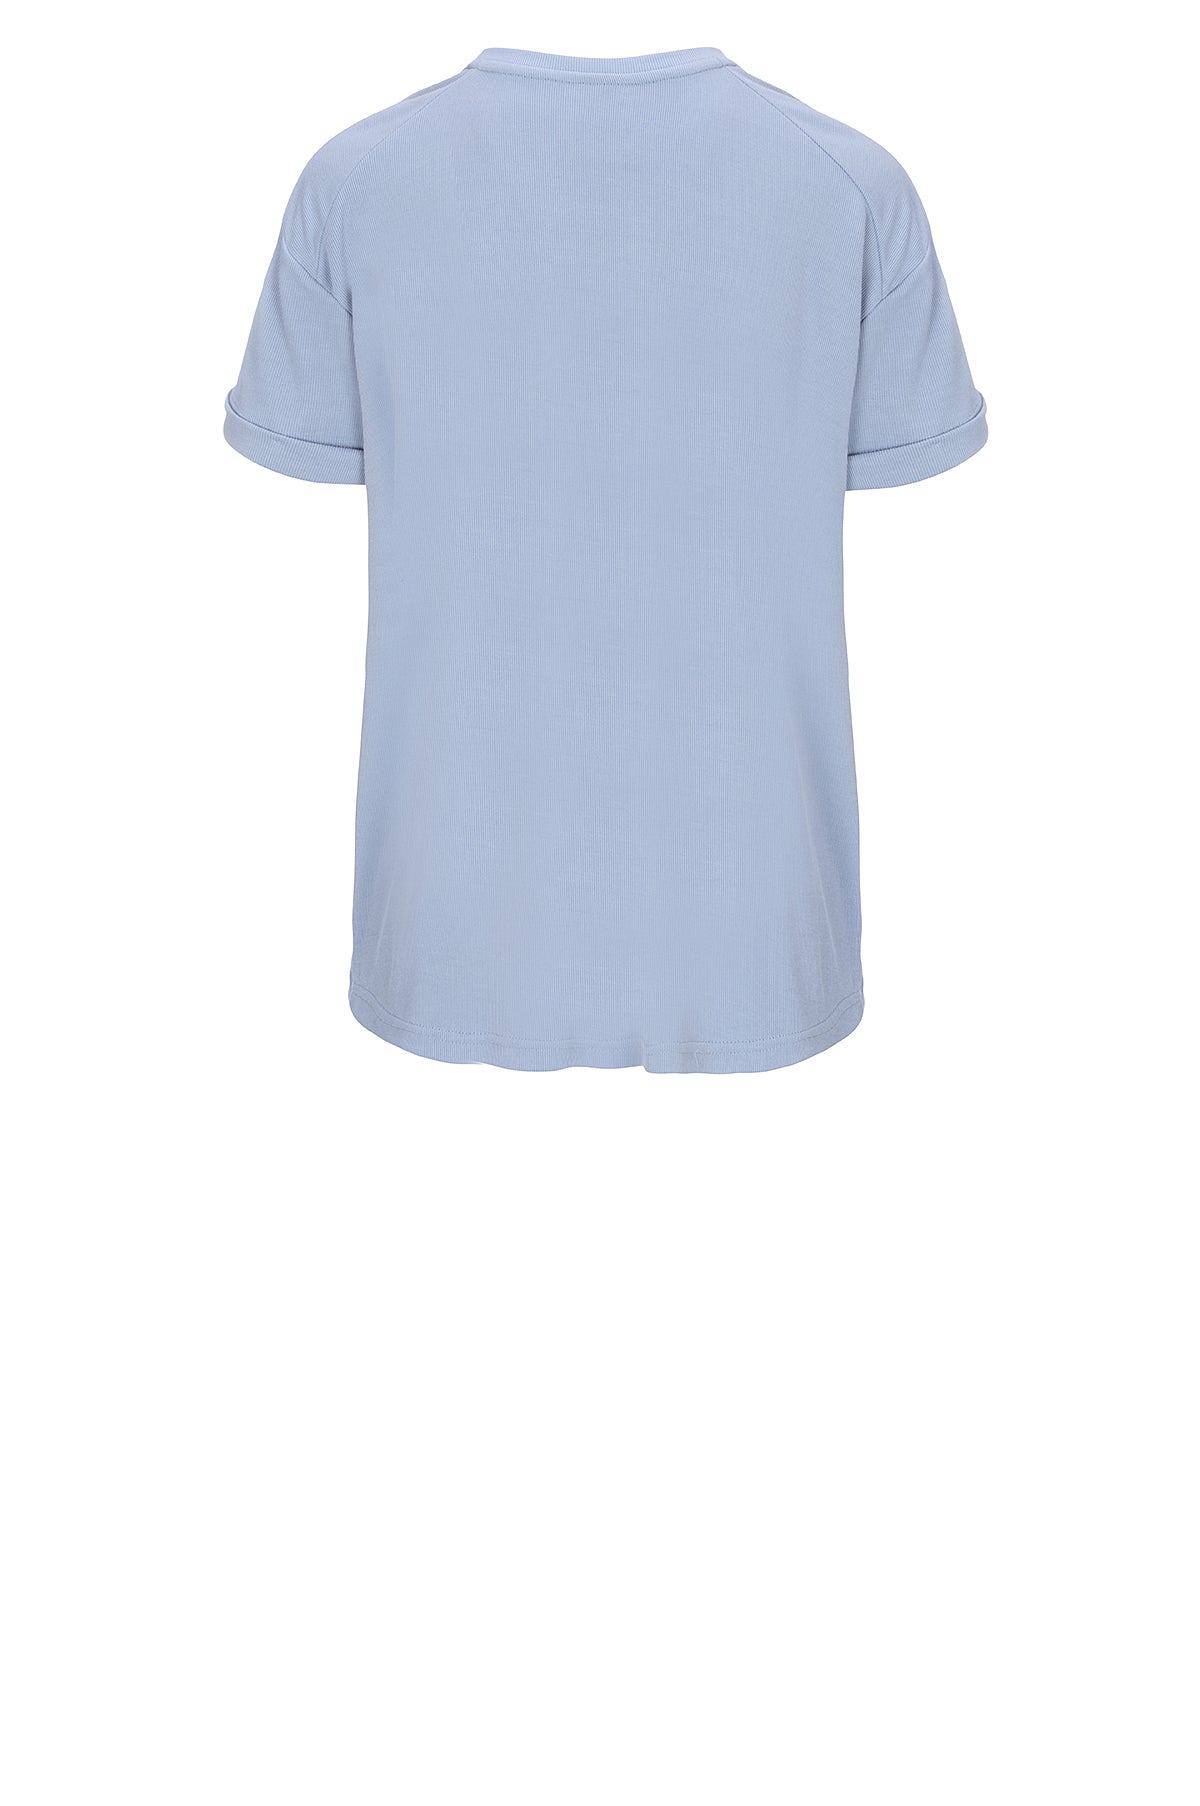 LUXZUZ // ONE TWO Karin T-Shirt 505 Sky blue